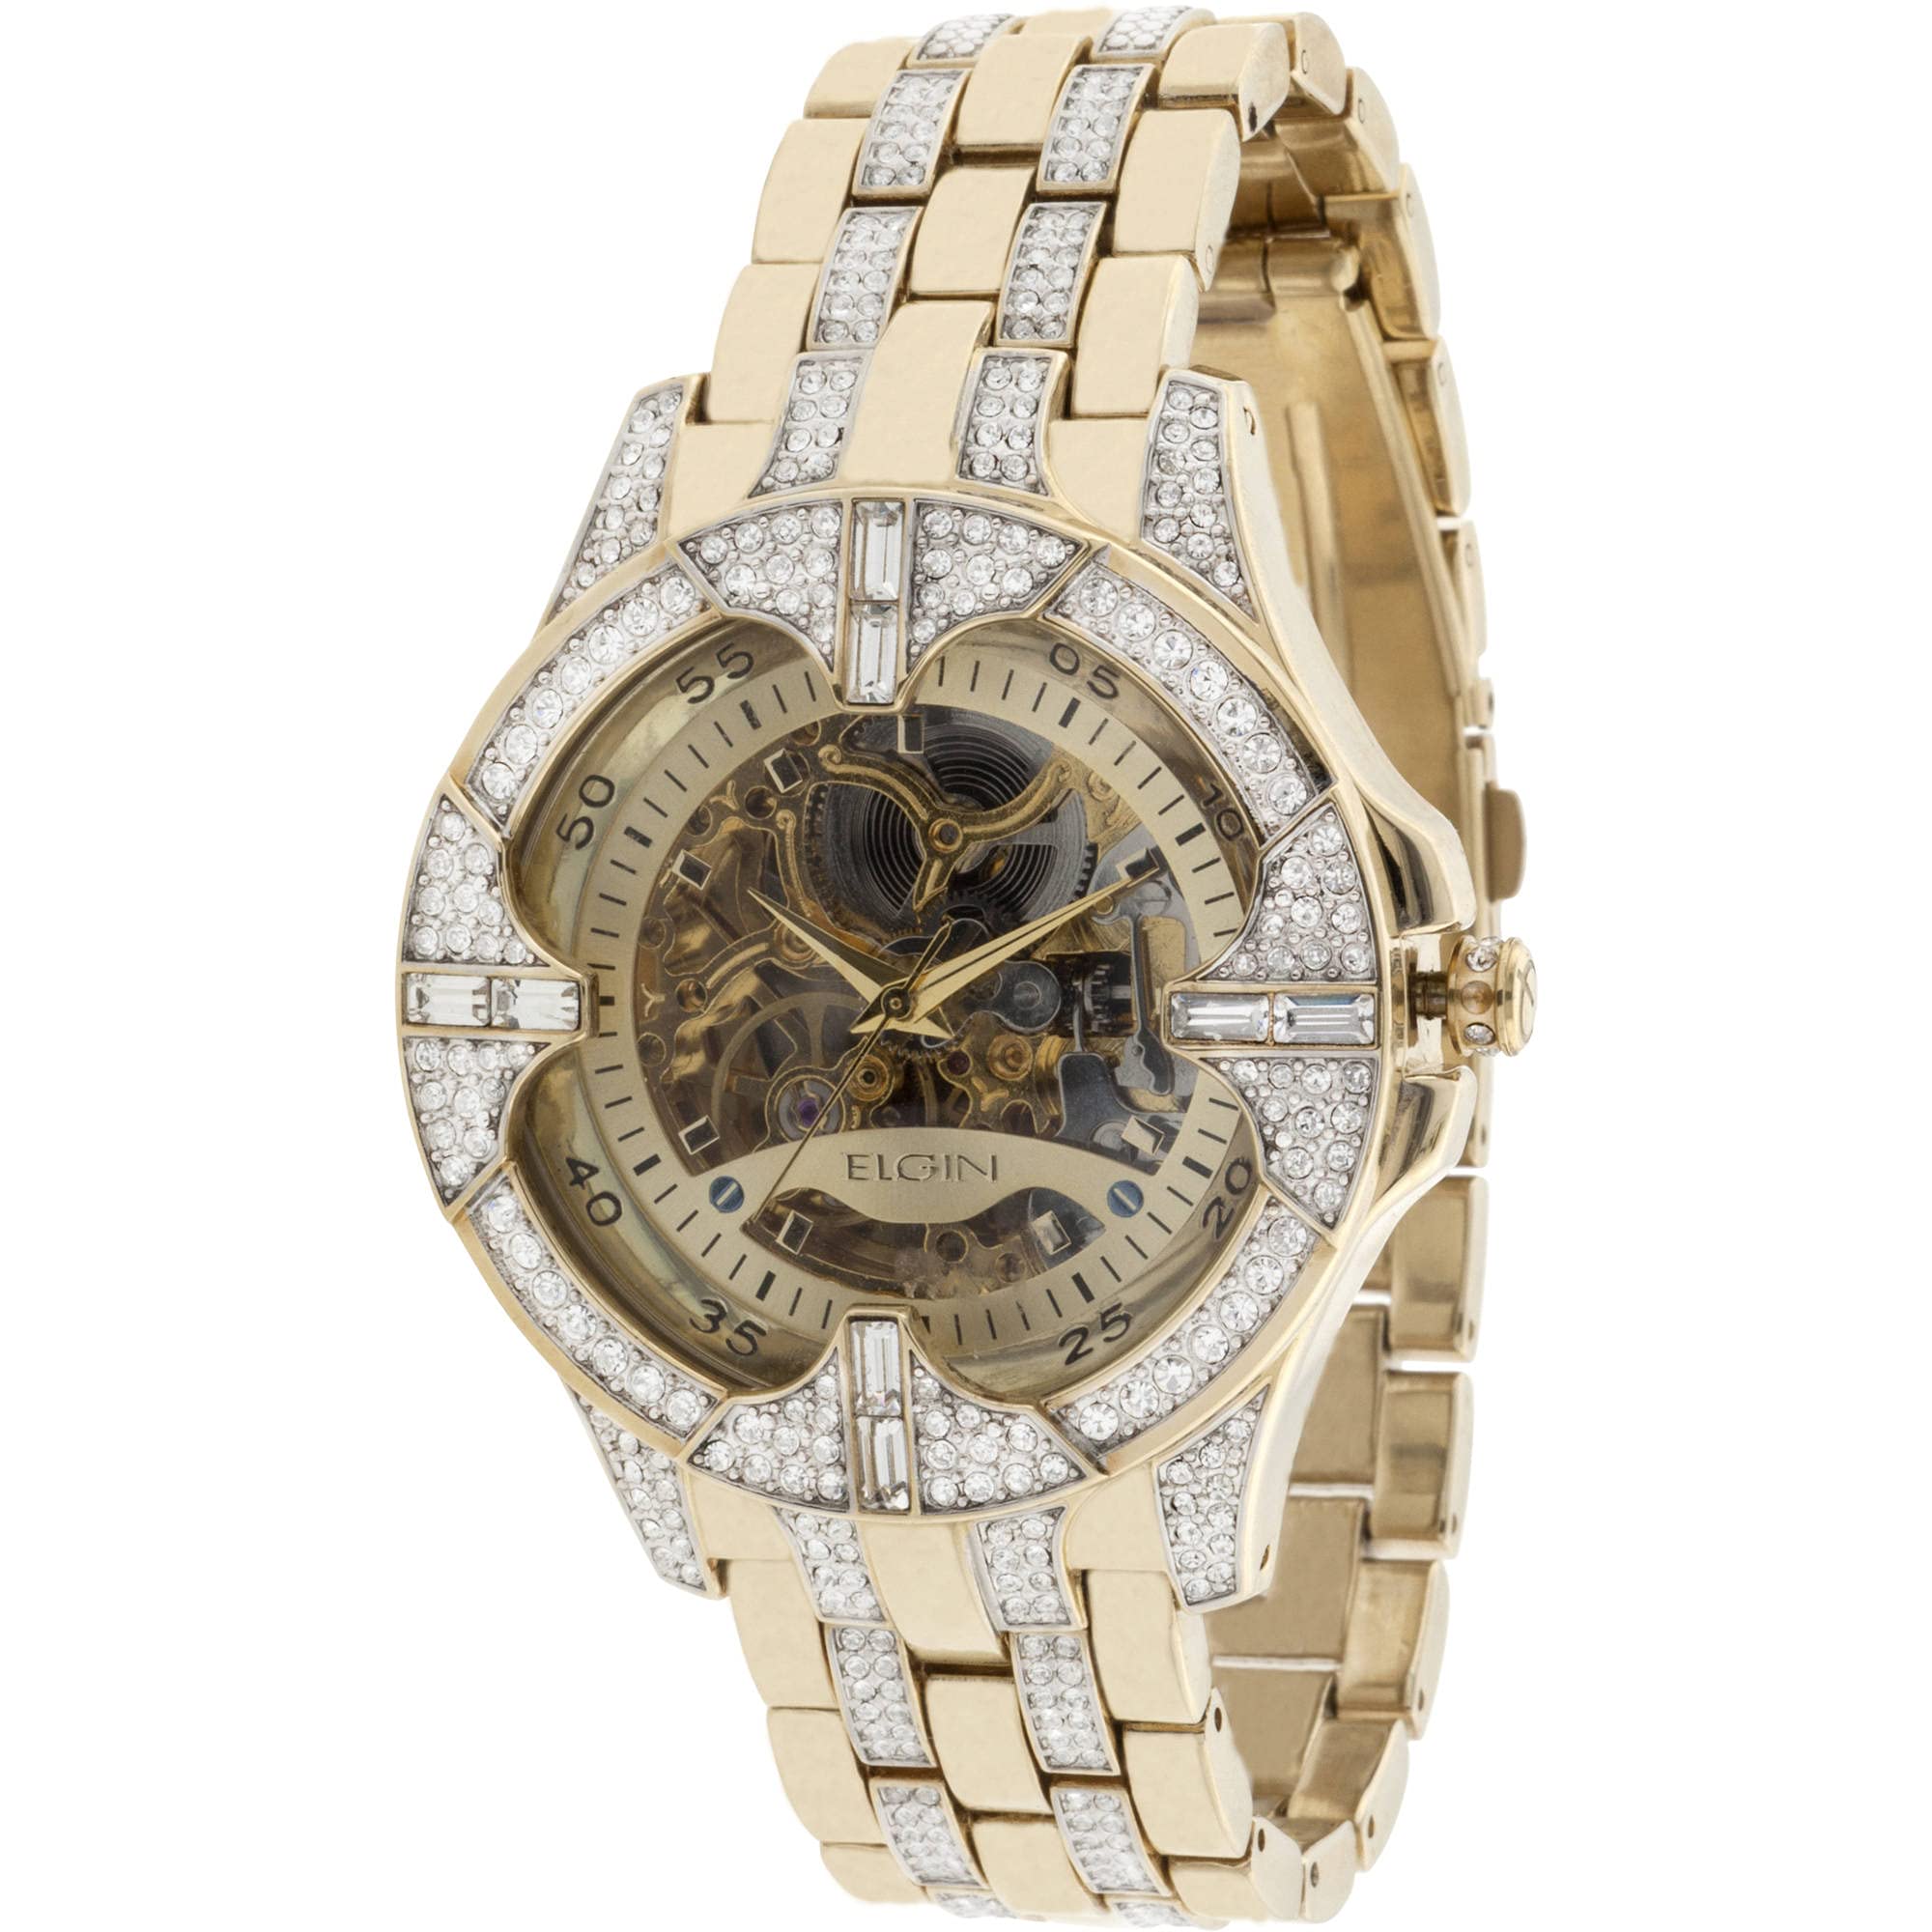 Elgin Men's Silver and Gold-Tone Analog Skeleton Watch with Crystal Accents (Model FG9919AZ)